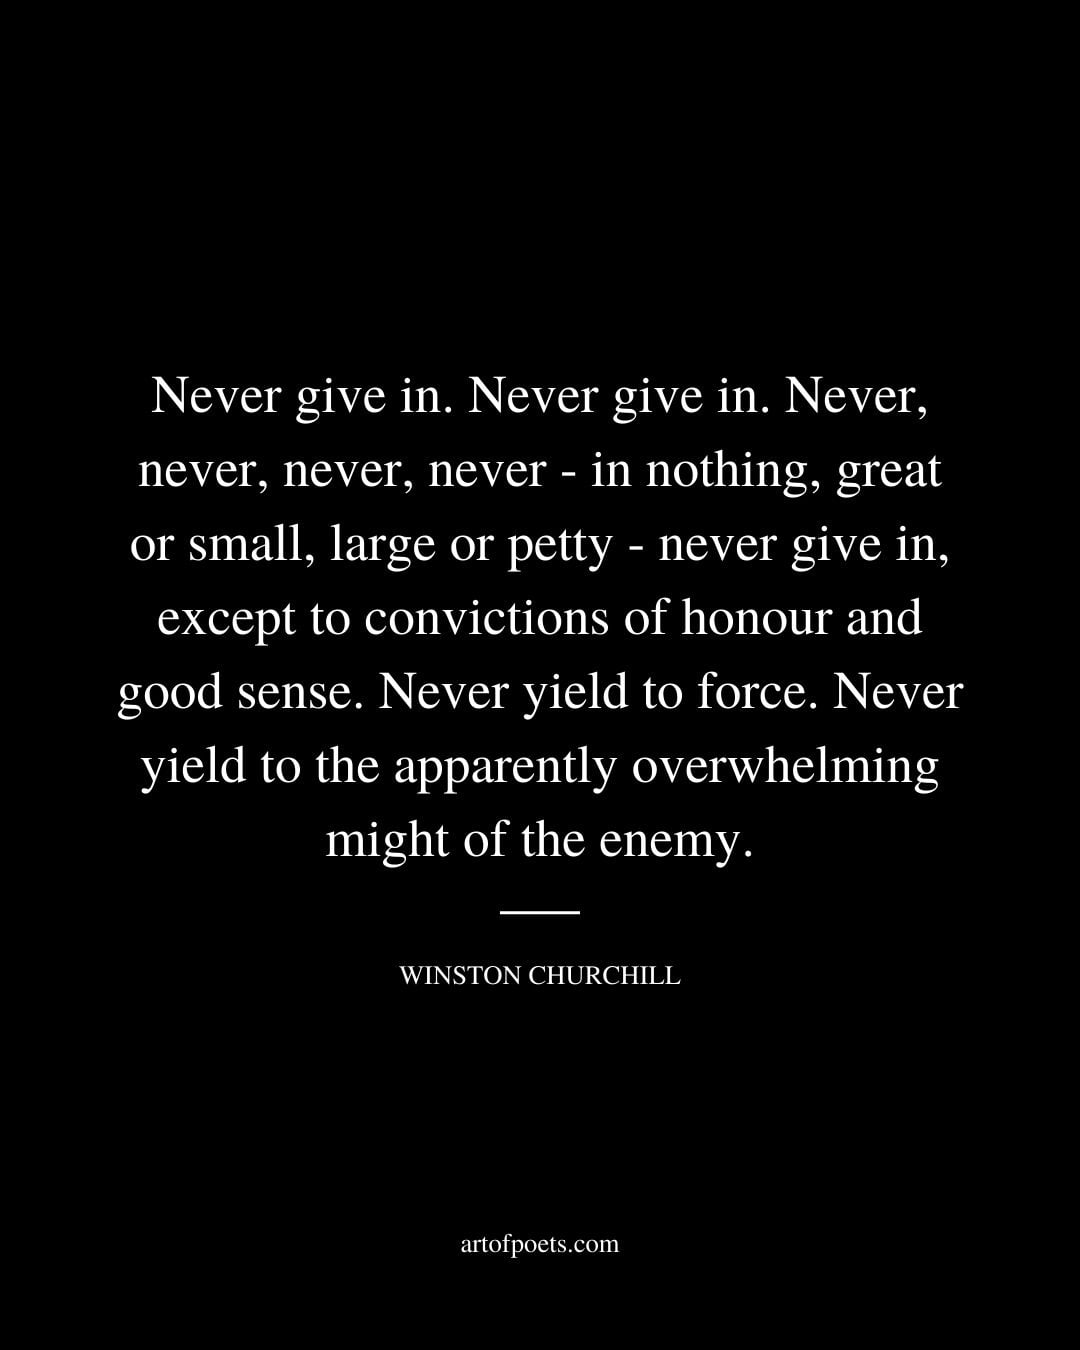 Never give in. Never give in. Never never never never in nothing great or small large or petty never give in